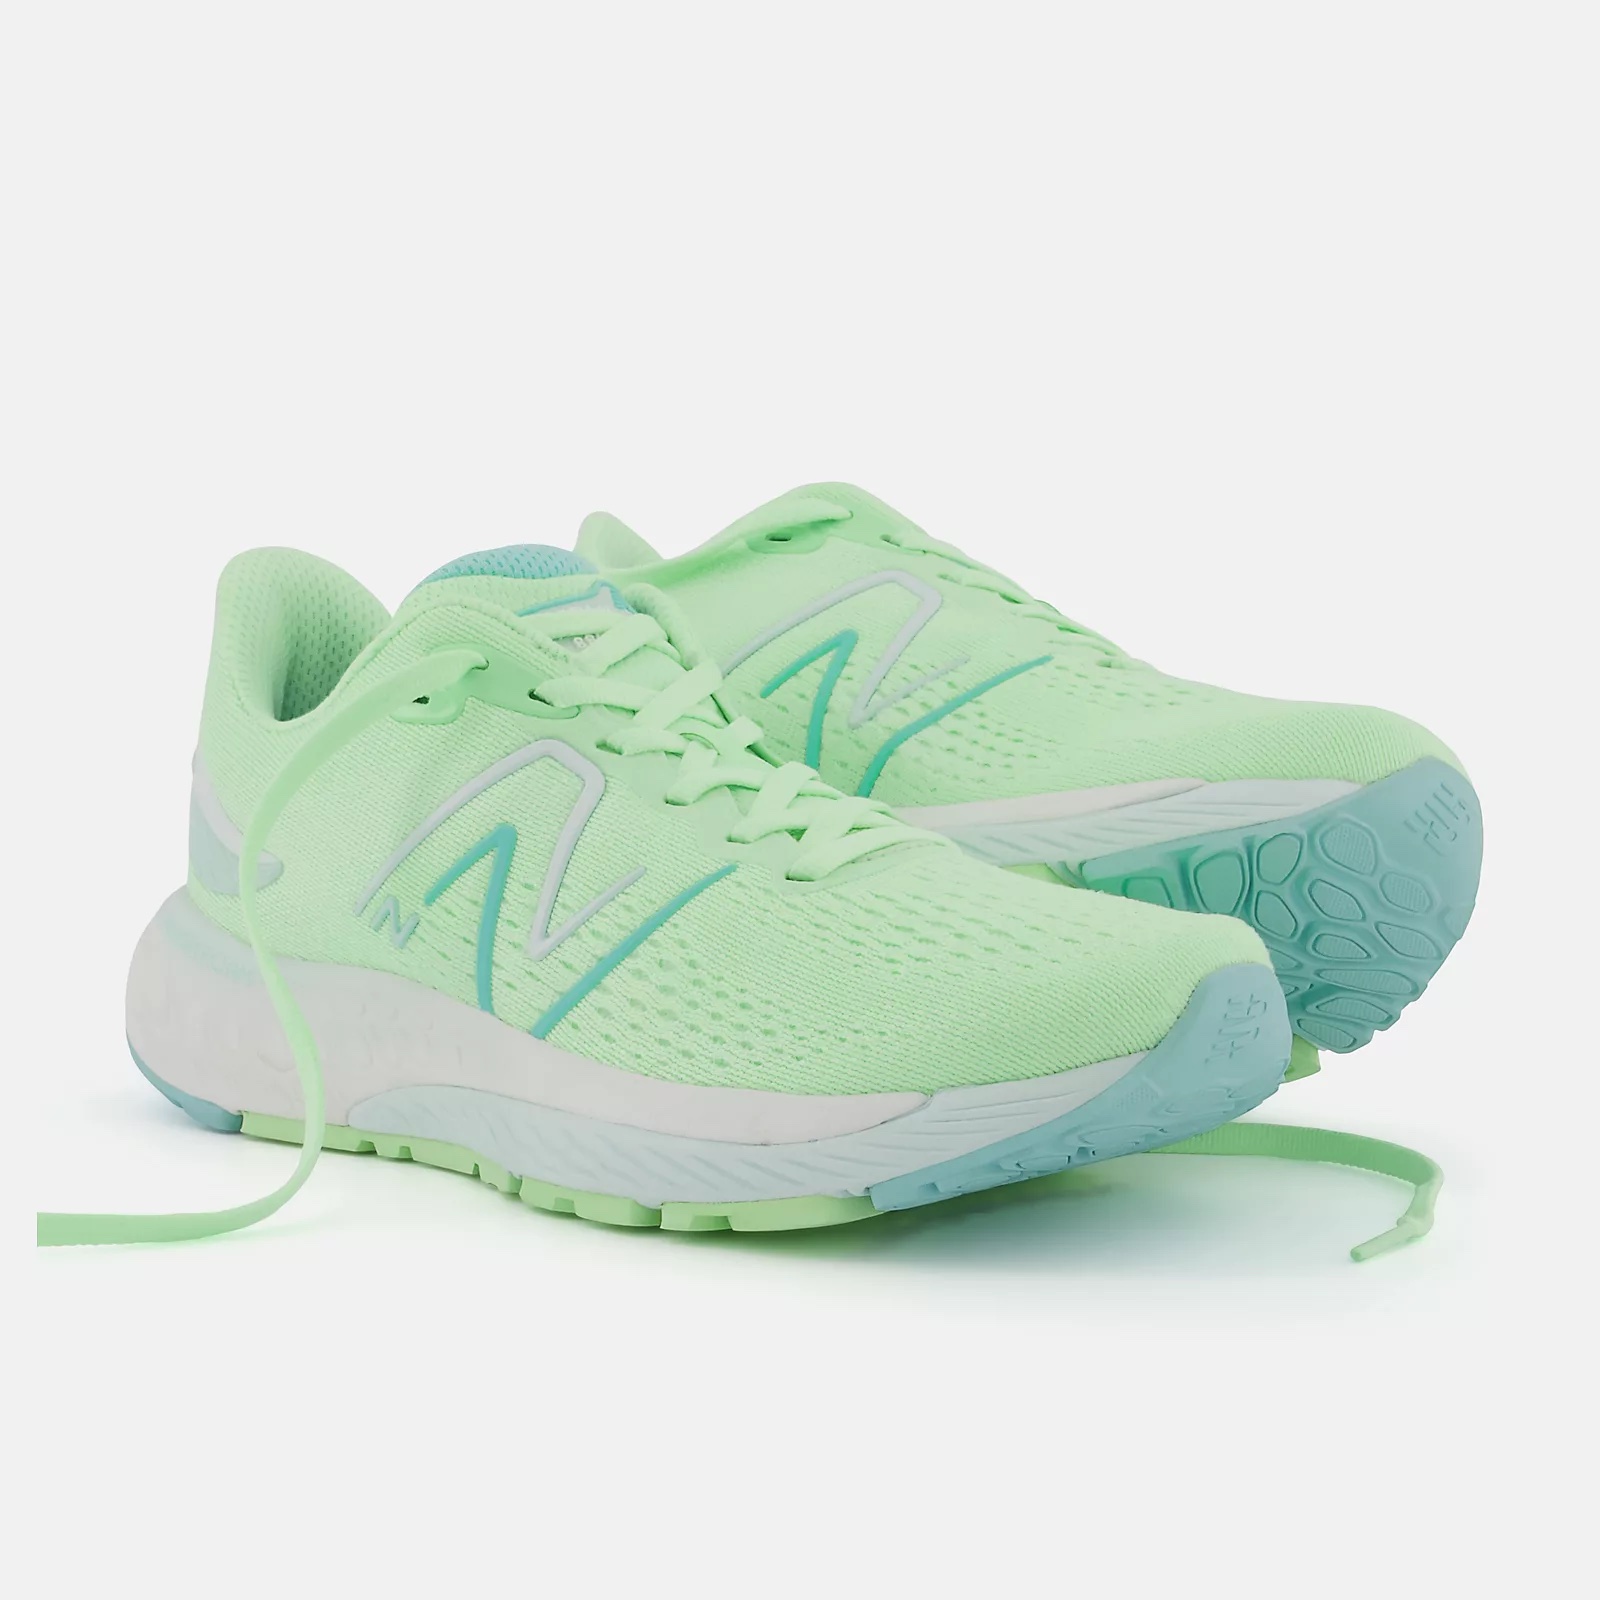 12 Best New Balance Shoes, According to in 2022 Well+Good